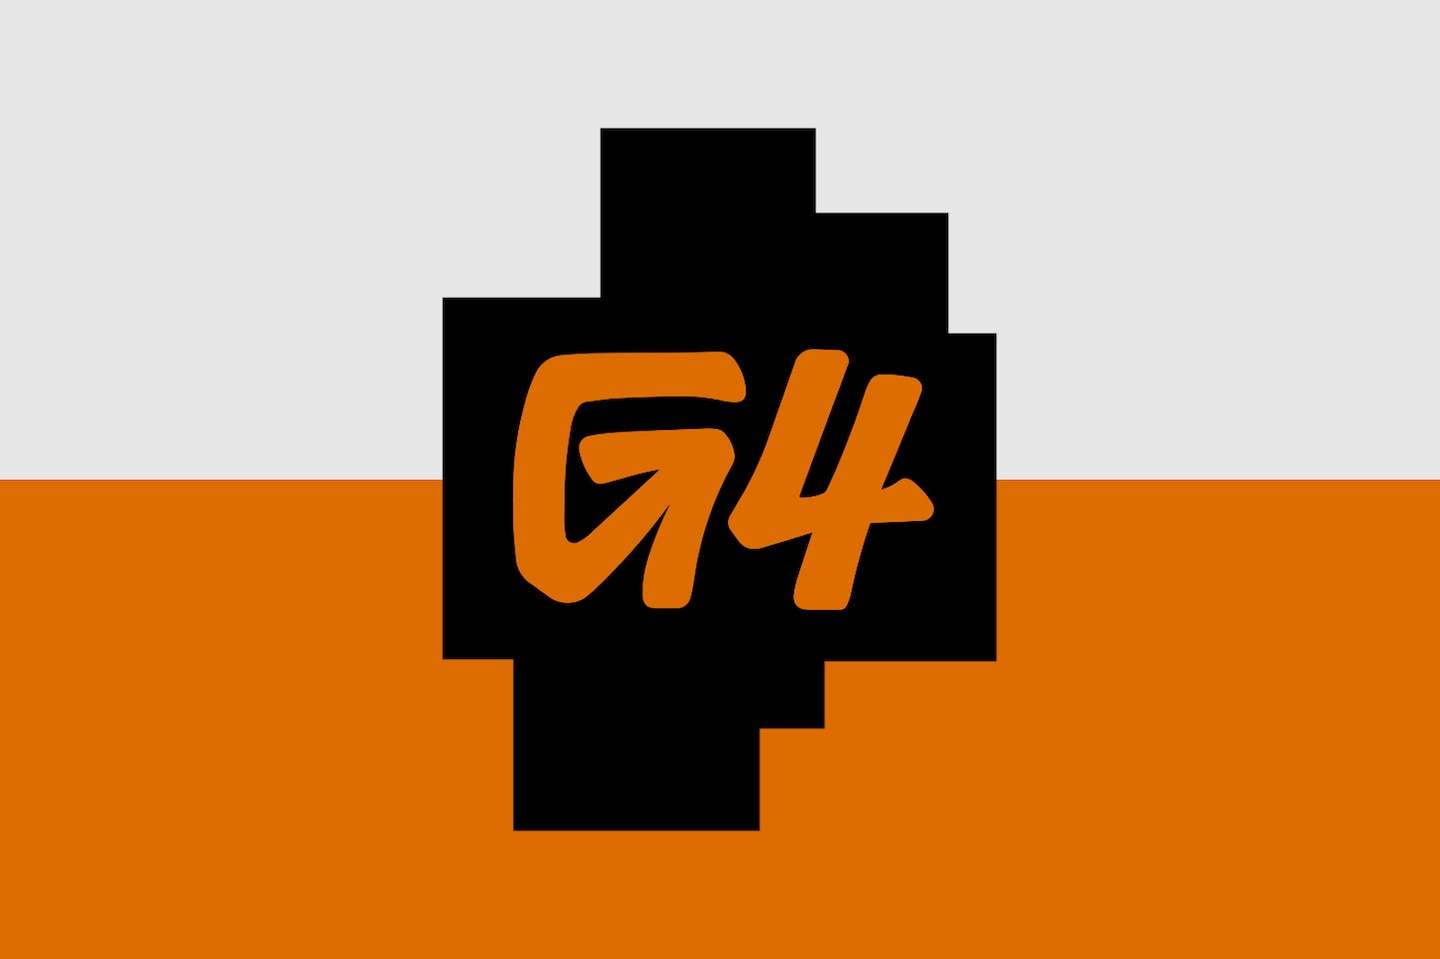 G4 shuts down after layoffs, high-profile talent departures